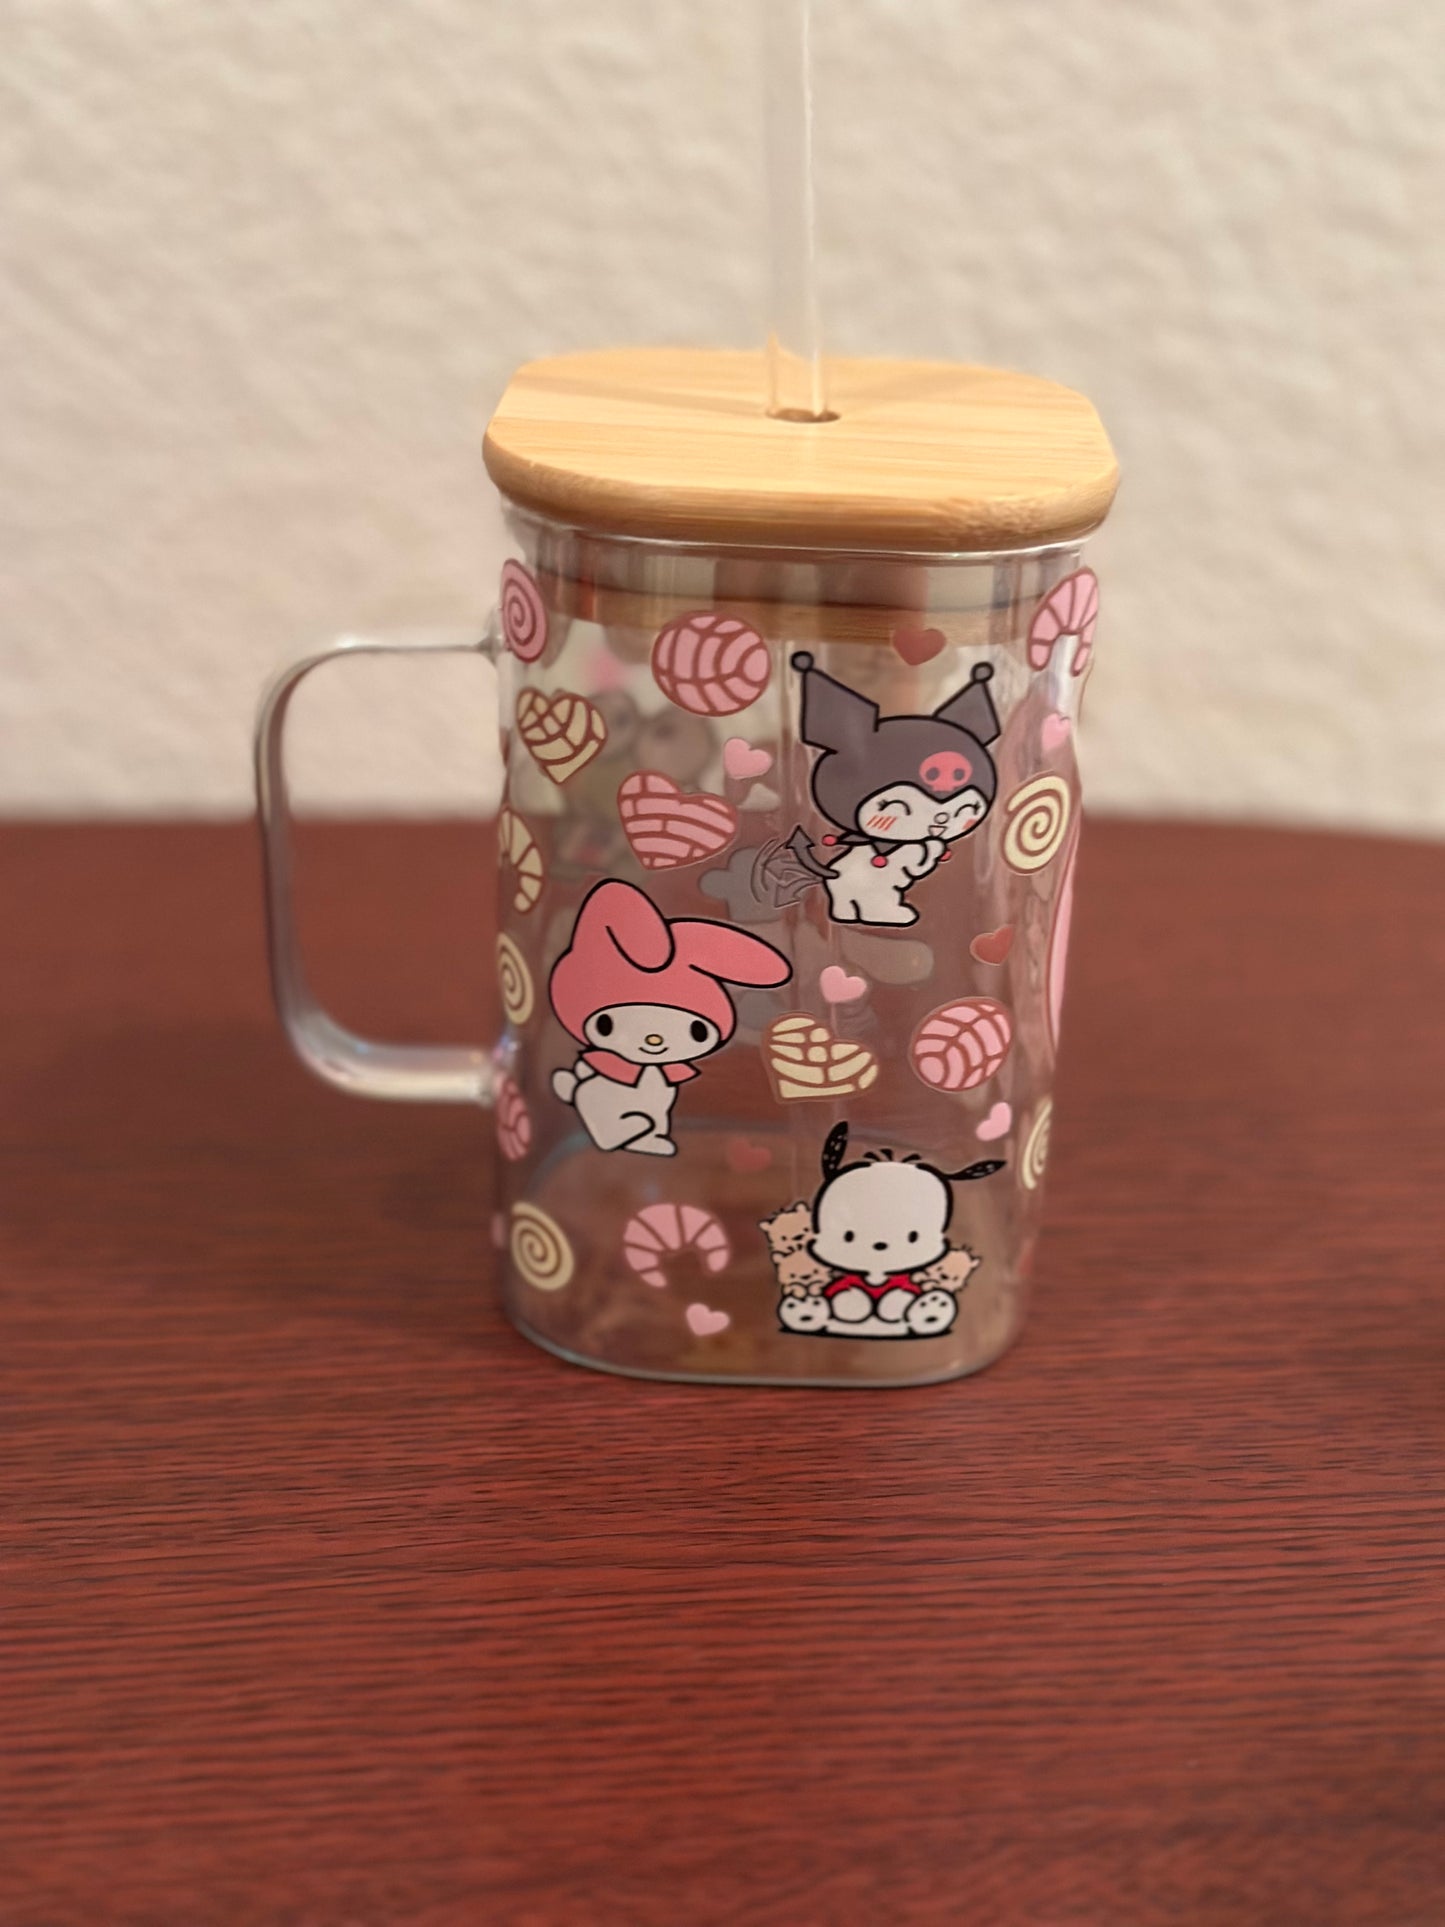 Hello Kitty & friends cafecito y chisme 20oz square glass cup